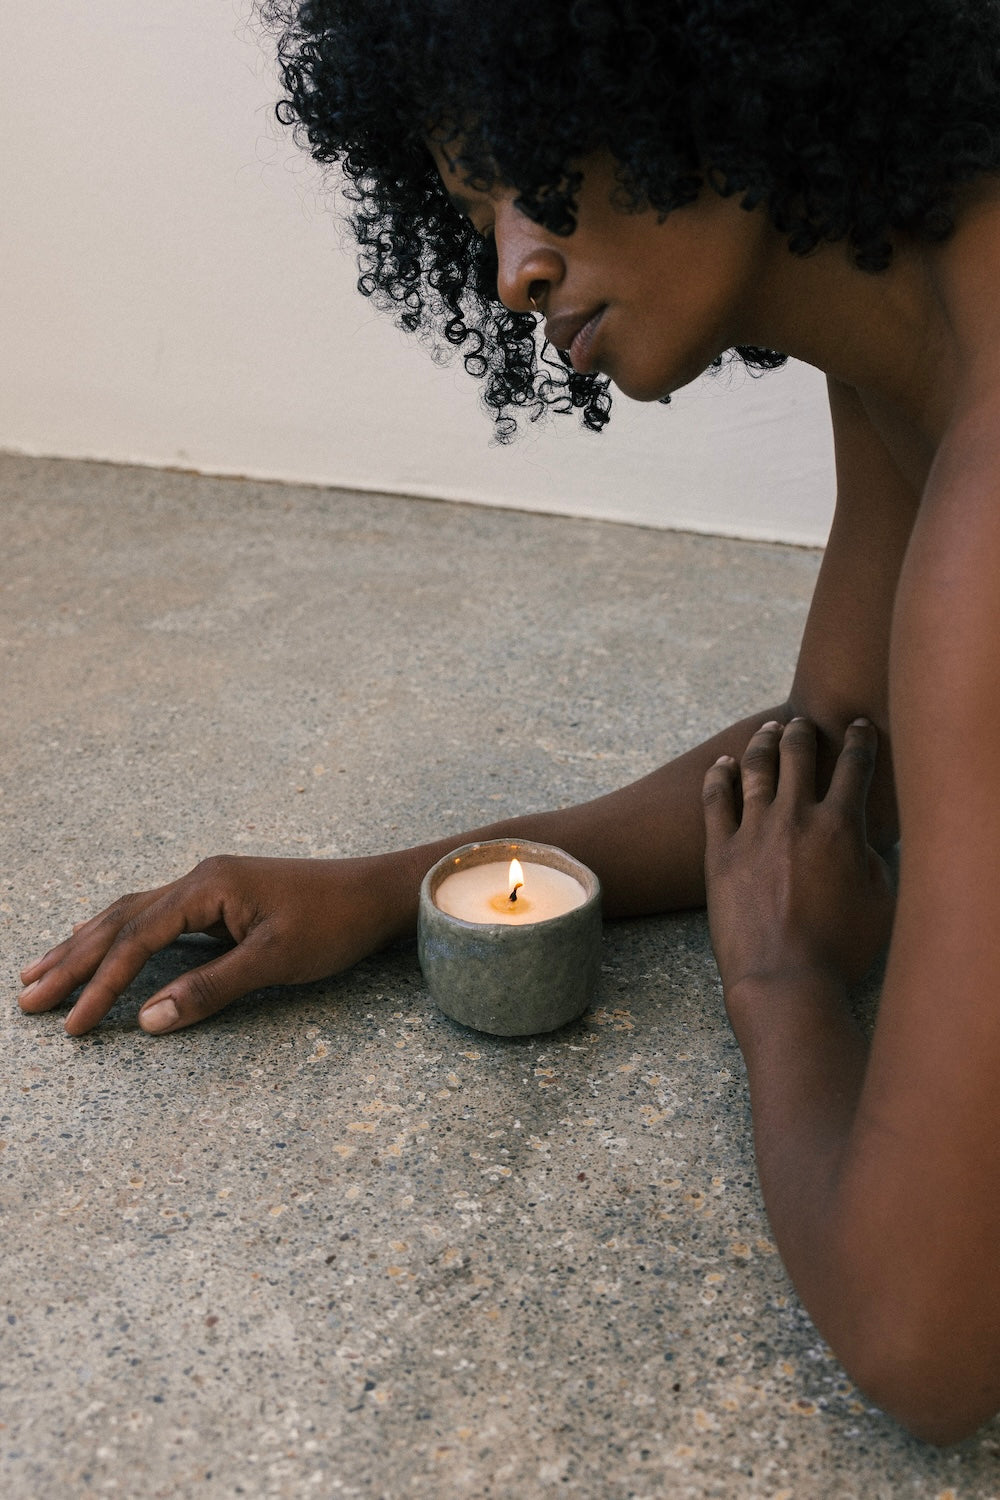 Indulge your senses with one of our small-batch, fully traceable, certified regenerative tallow-beeswax candles made with a unique base of local, organic suet tallow from pasture-raised cattle and calendula flower CO2 Extract and responsibly sourced, local raw beeswax from a master beekeeper.